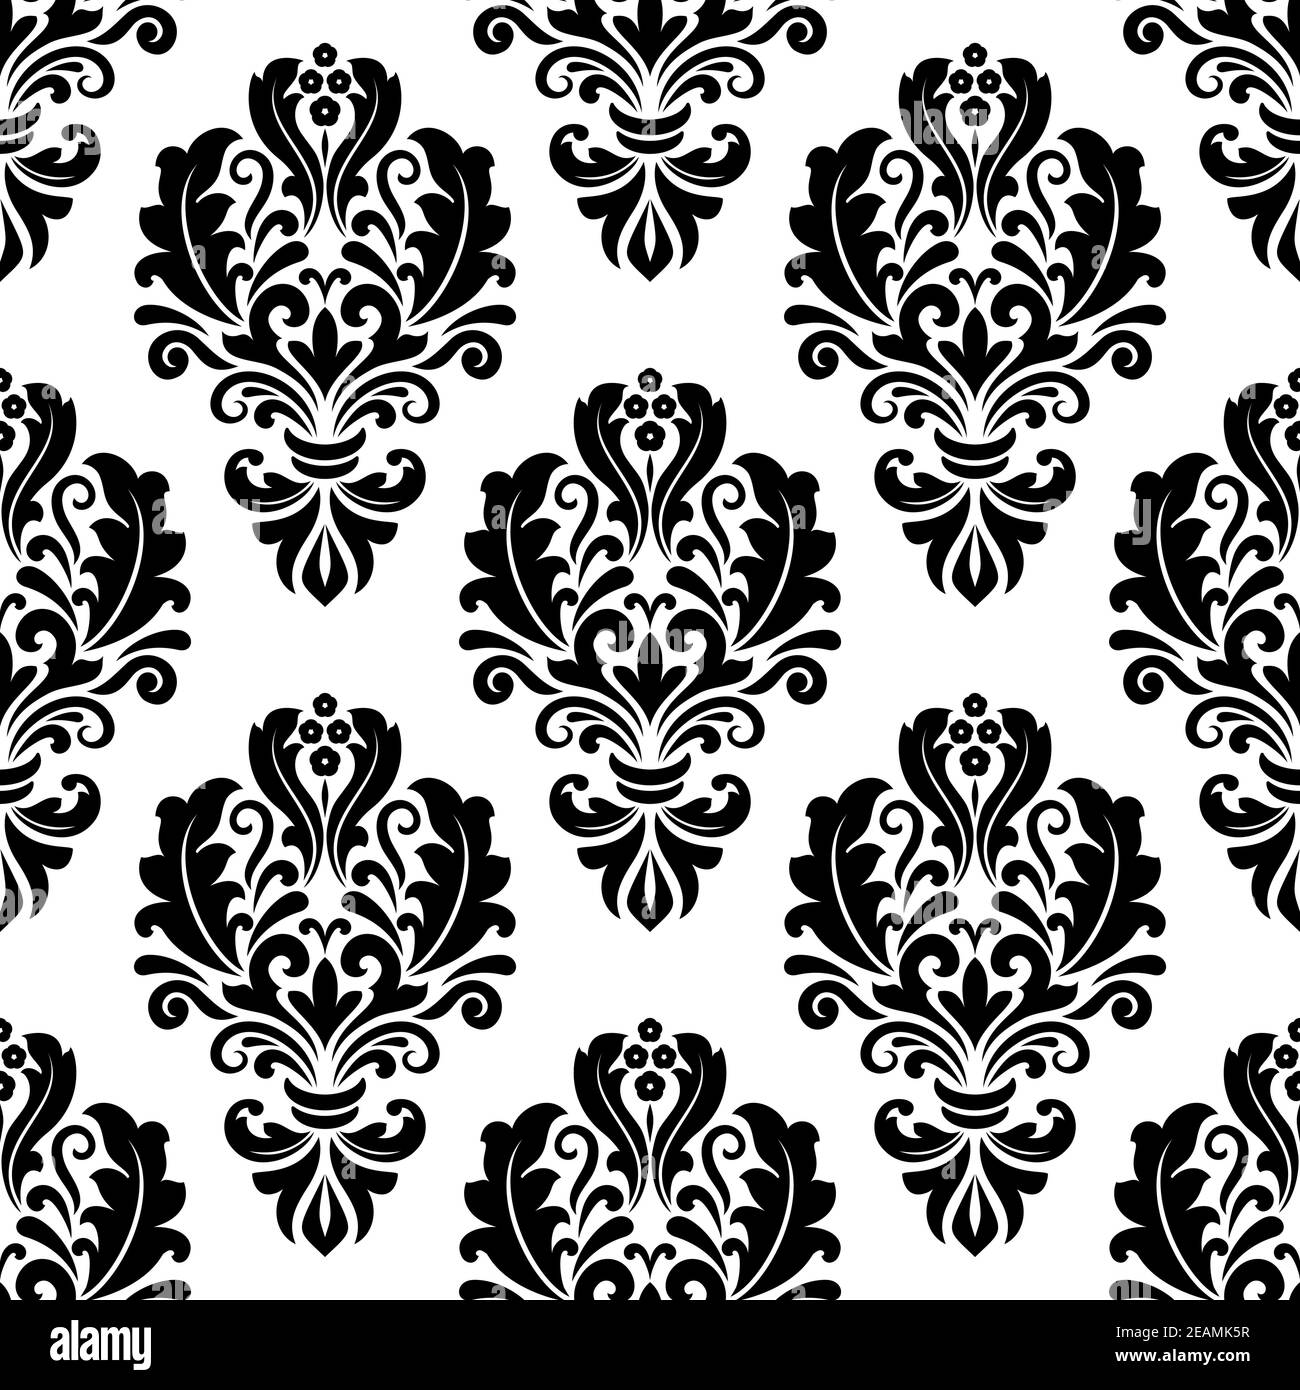 Seamless bold black colored floral arabesque pattern in damask style motifs suitable for wallpaper, tiles and fabric design isolated over white colore Stock Vector